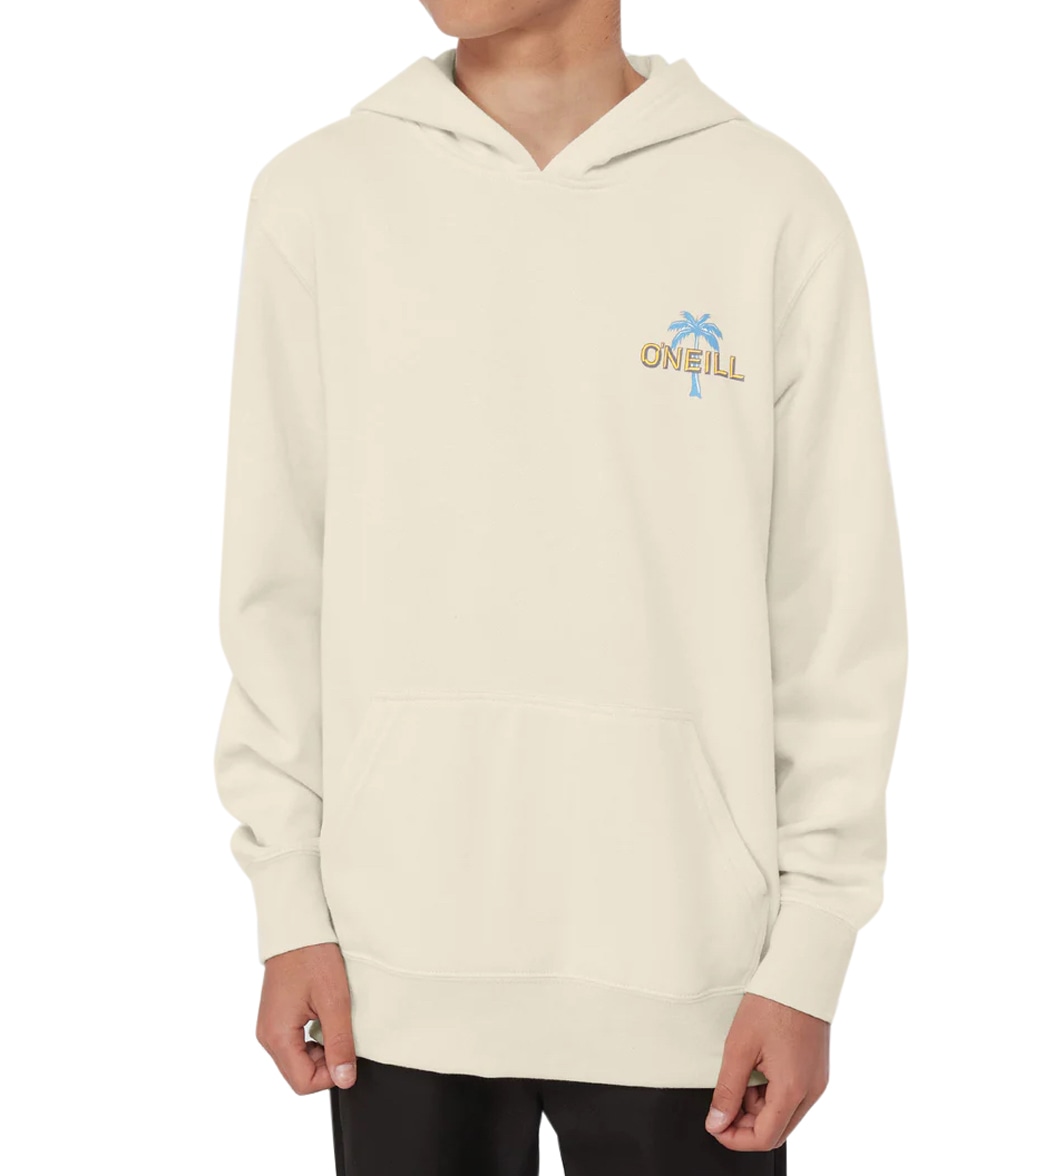 O'neill Boys' Fifty Two Print Fill Pullover Fleece Big Kid - Cream Large Cotton/Polyester - Swimoutlet.com